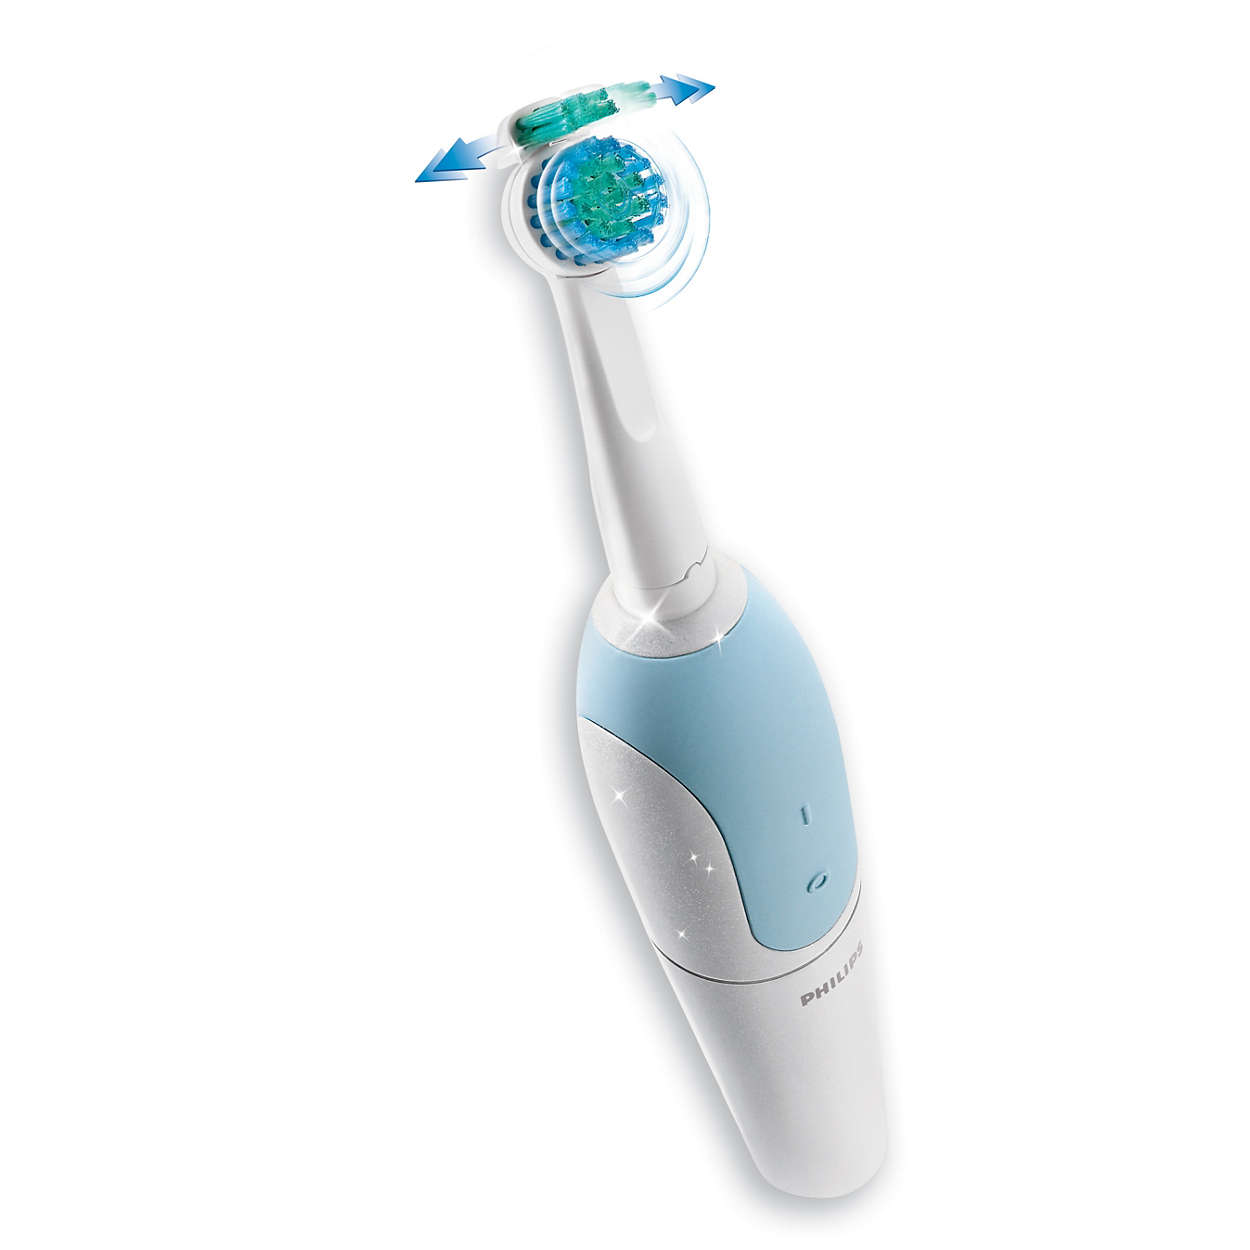 Rechargeable toothbrush HX1610